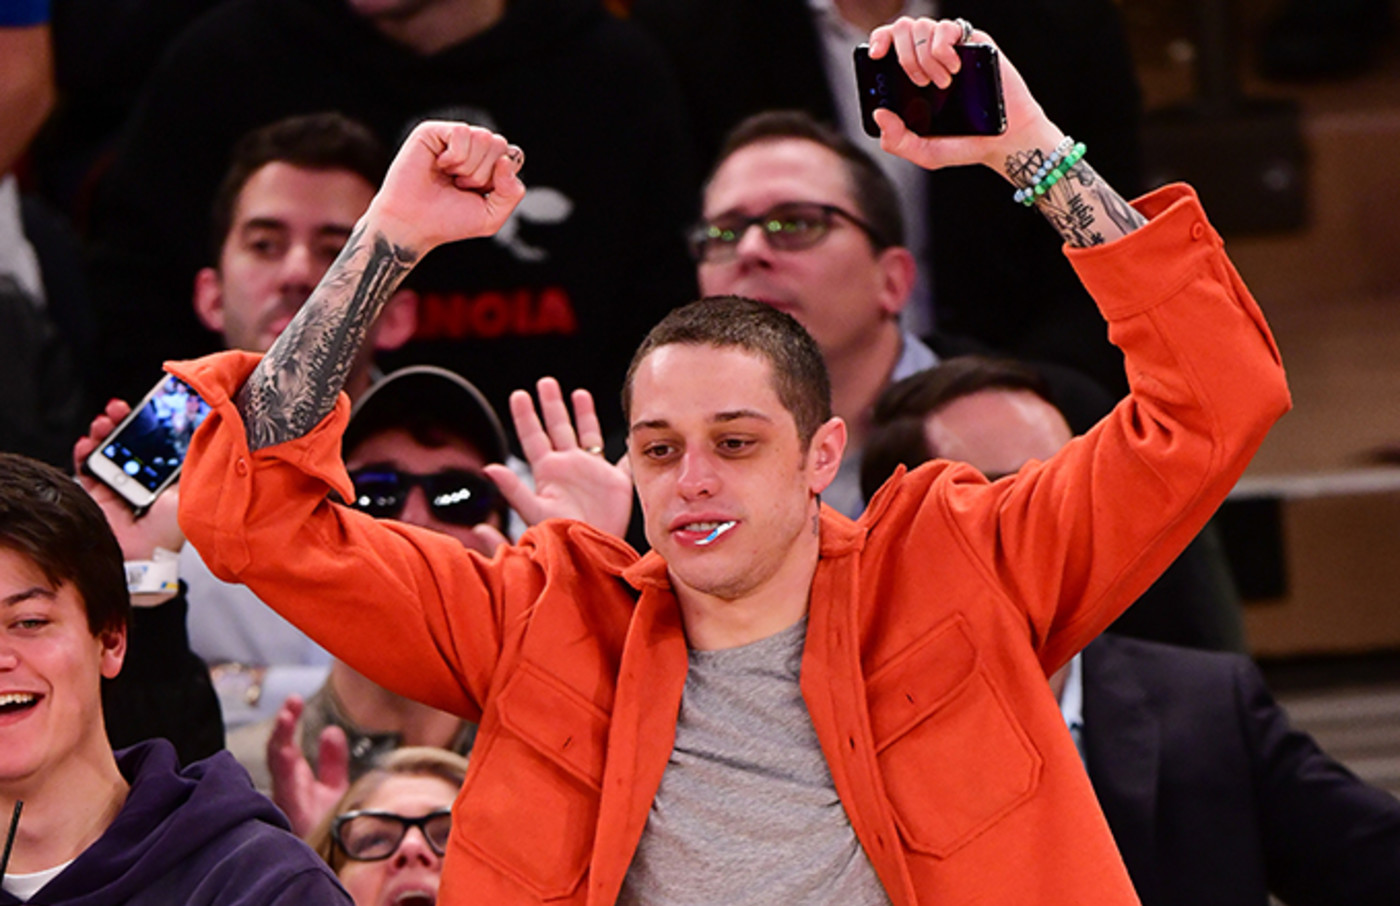 Pete Davidson Says He Thinks Some Women in Entertainment â€˜Use Gay Men